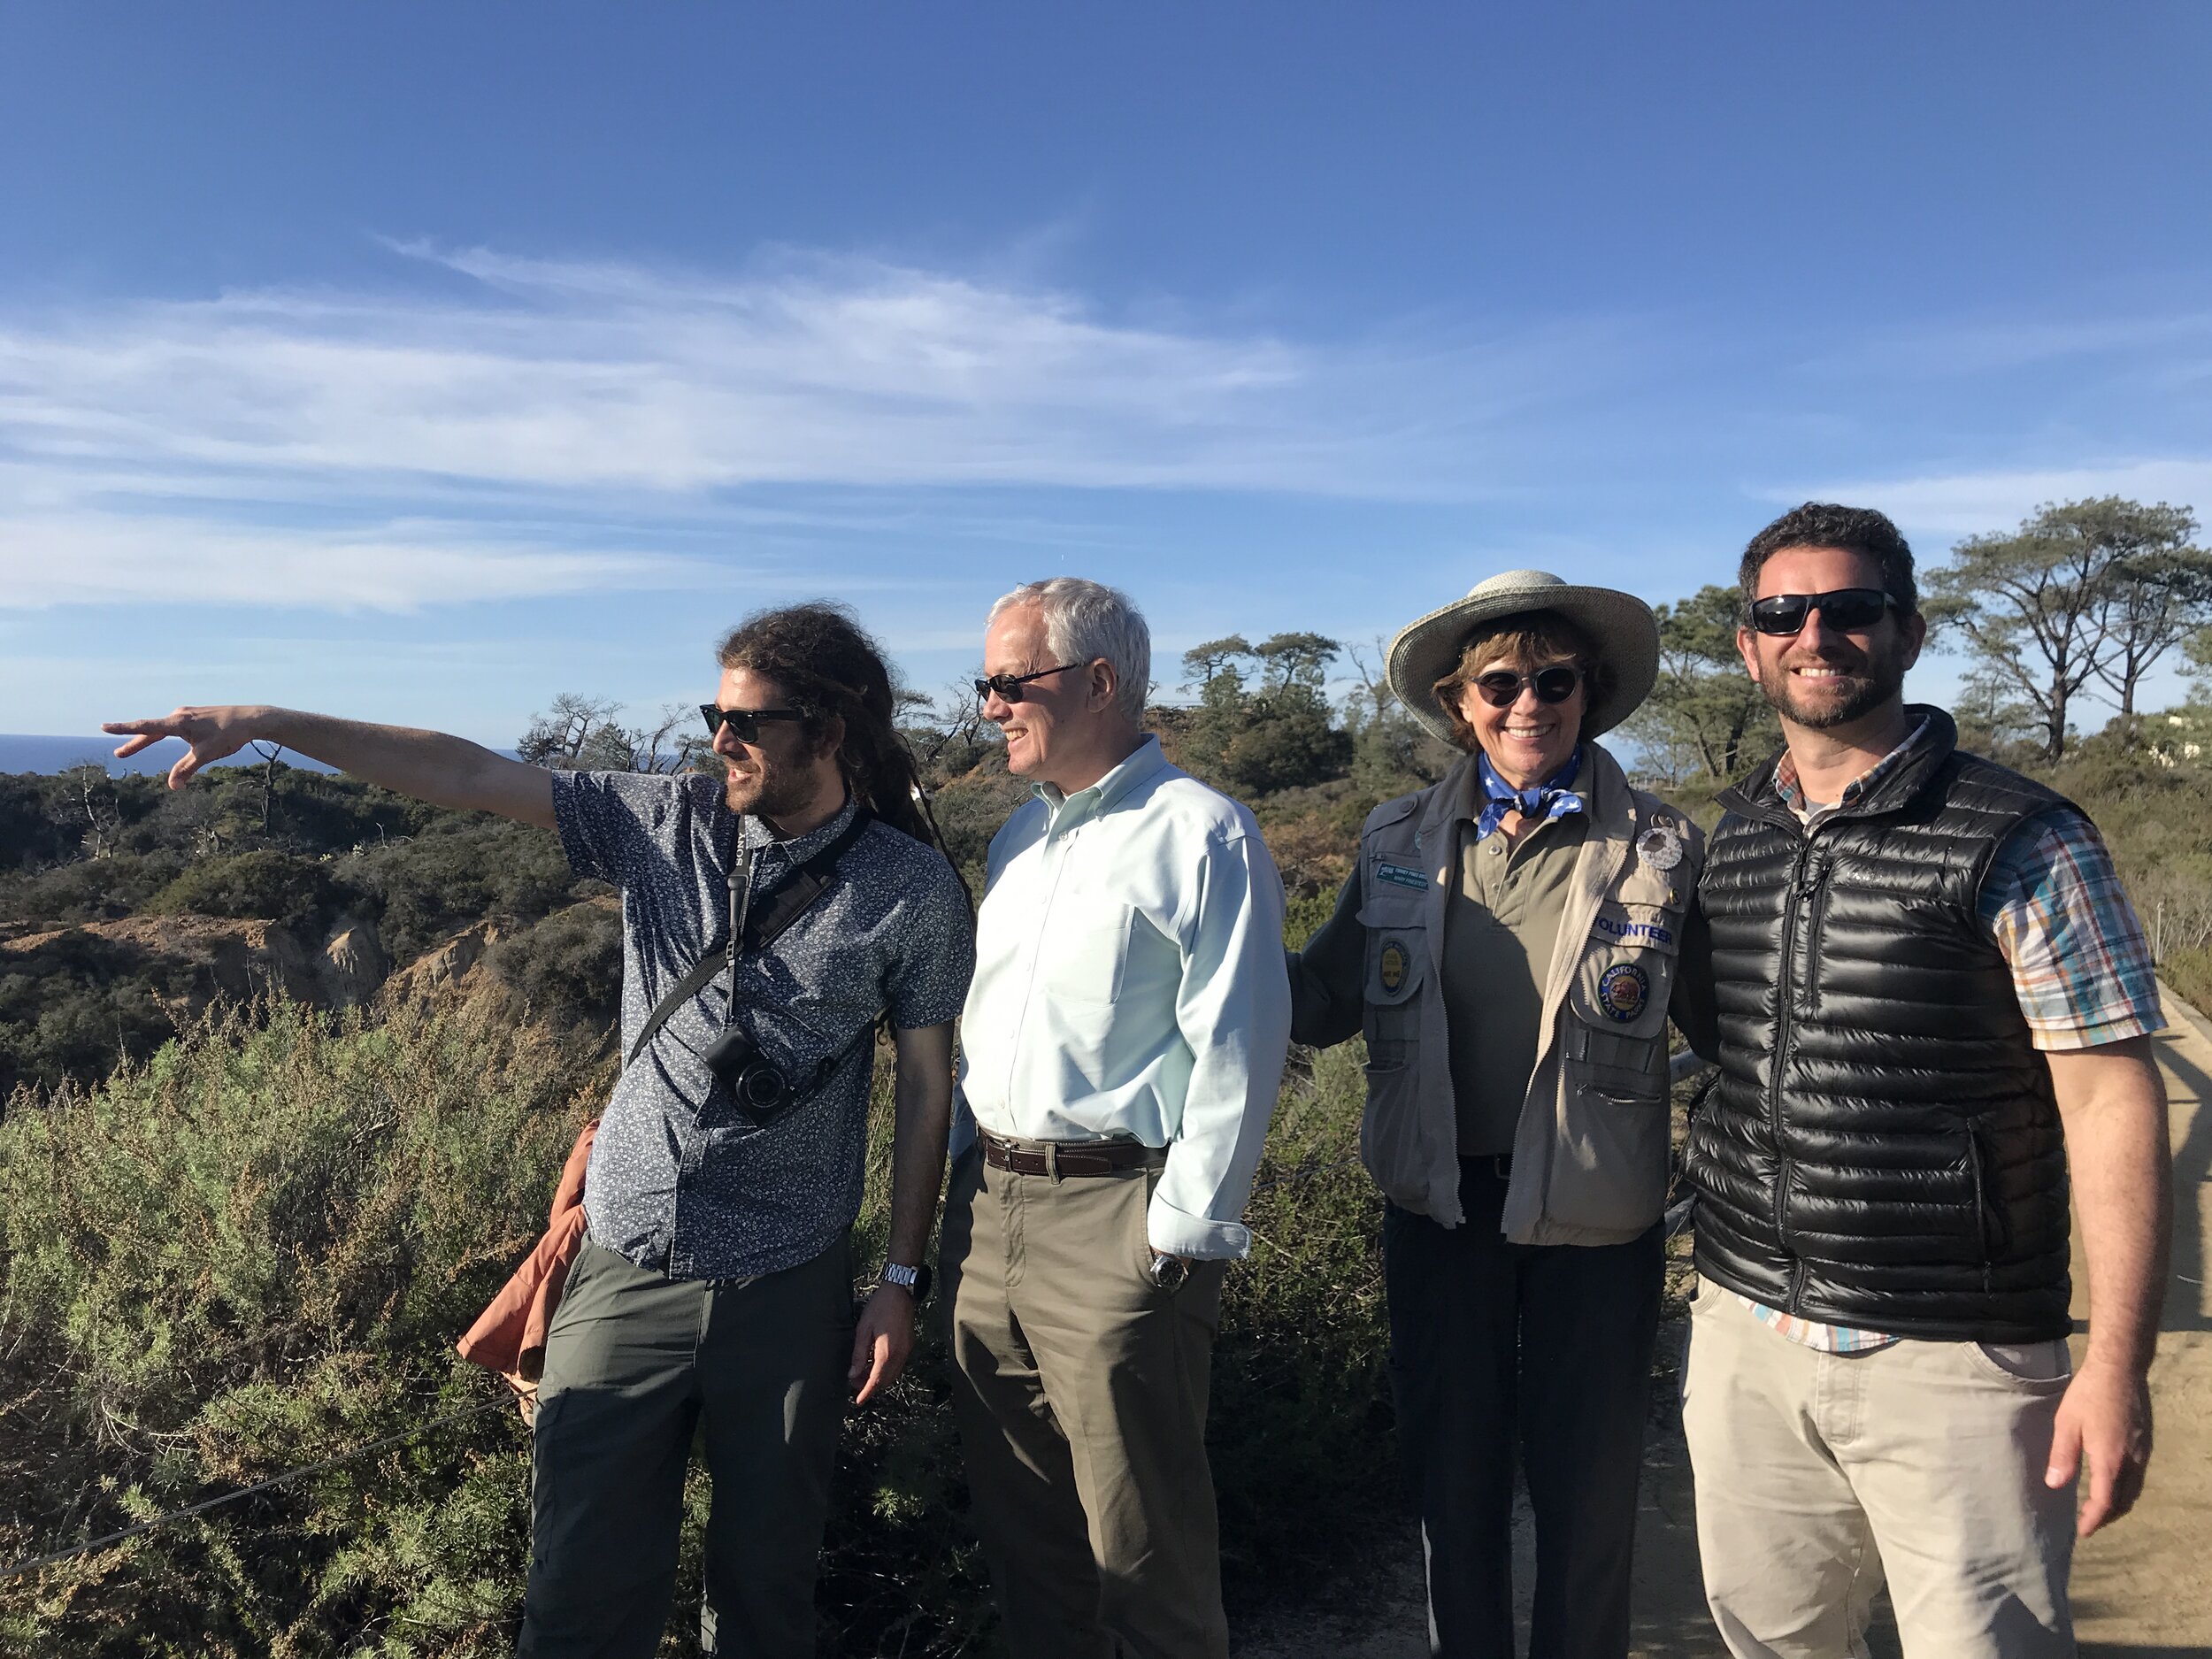 With colleagues from the San Diego Botanic Garden - photograph courtesy of Brandi Eide.